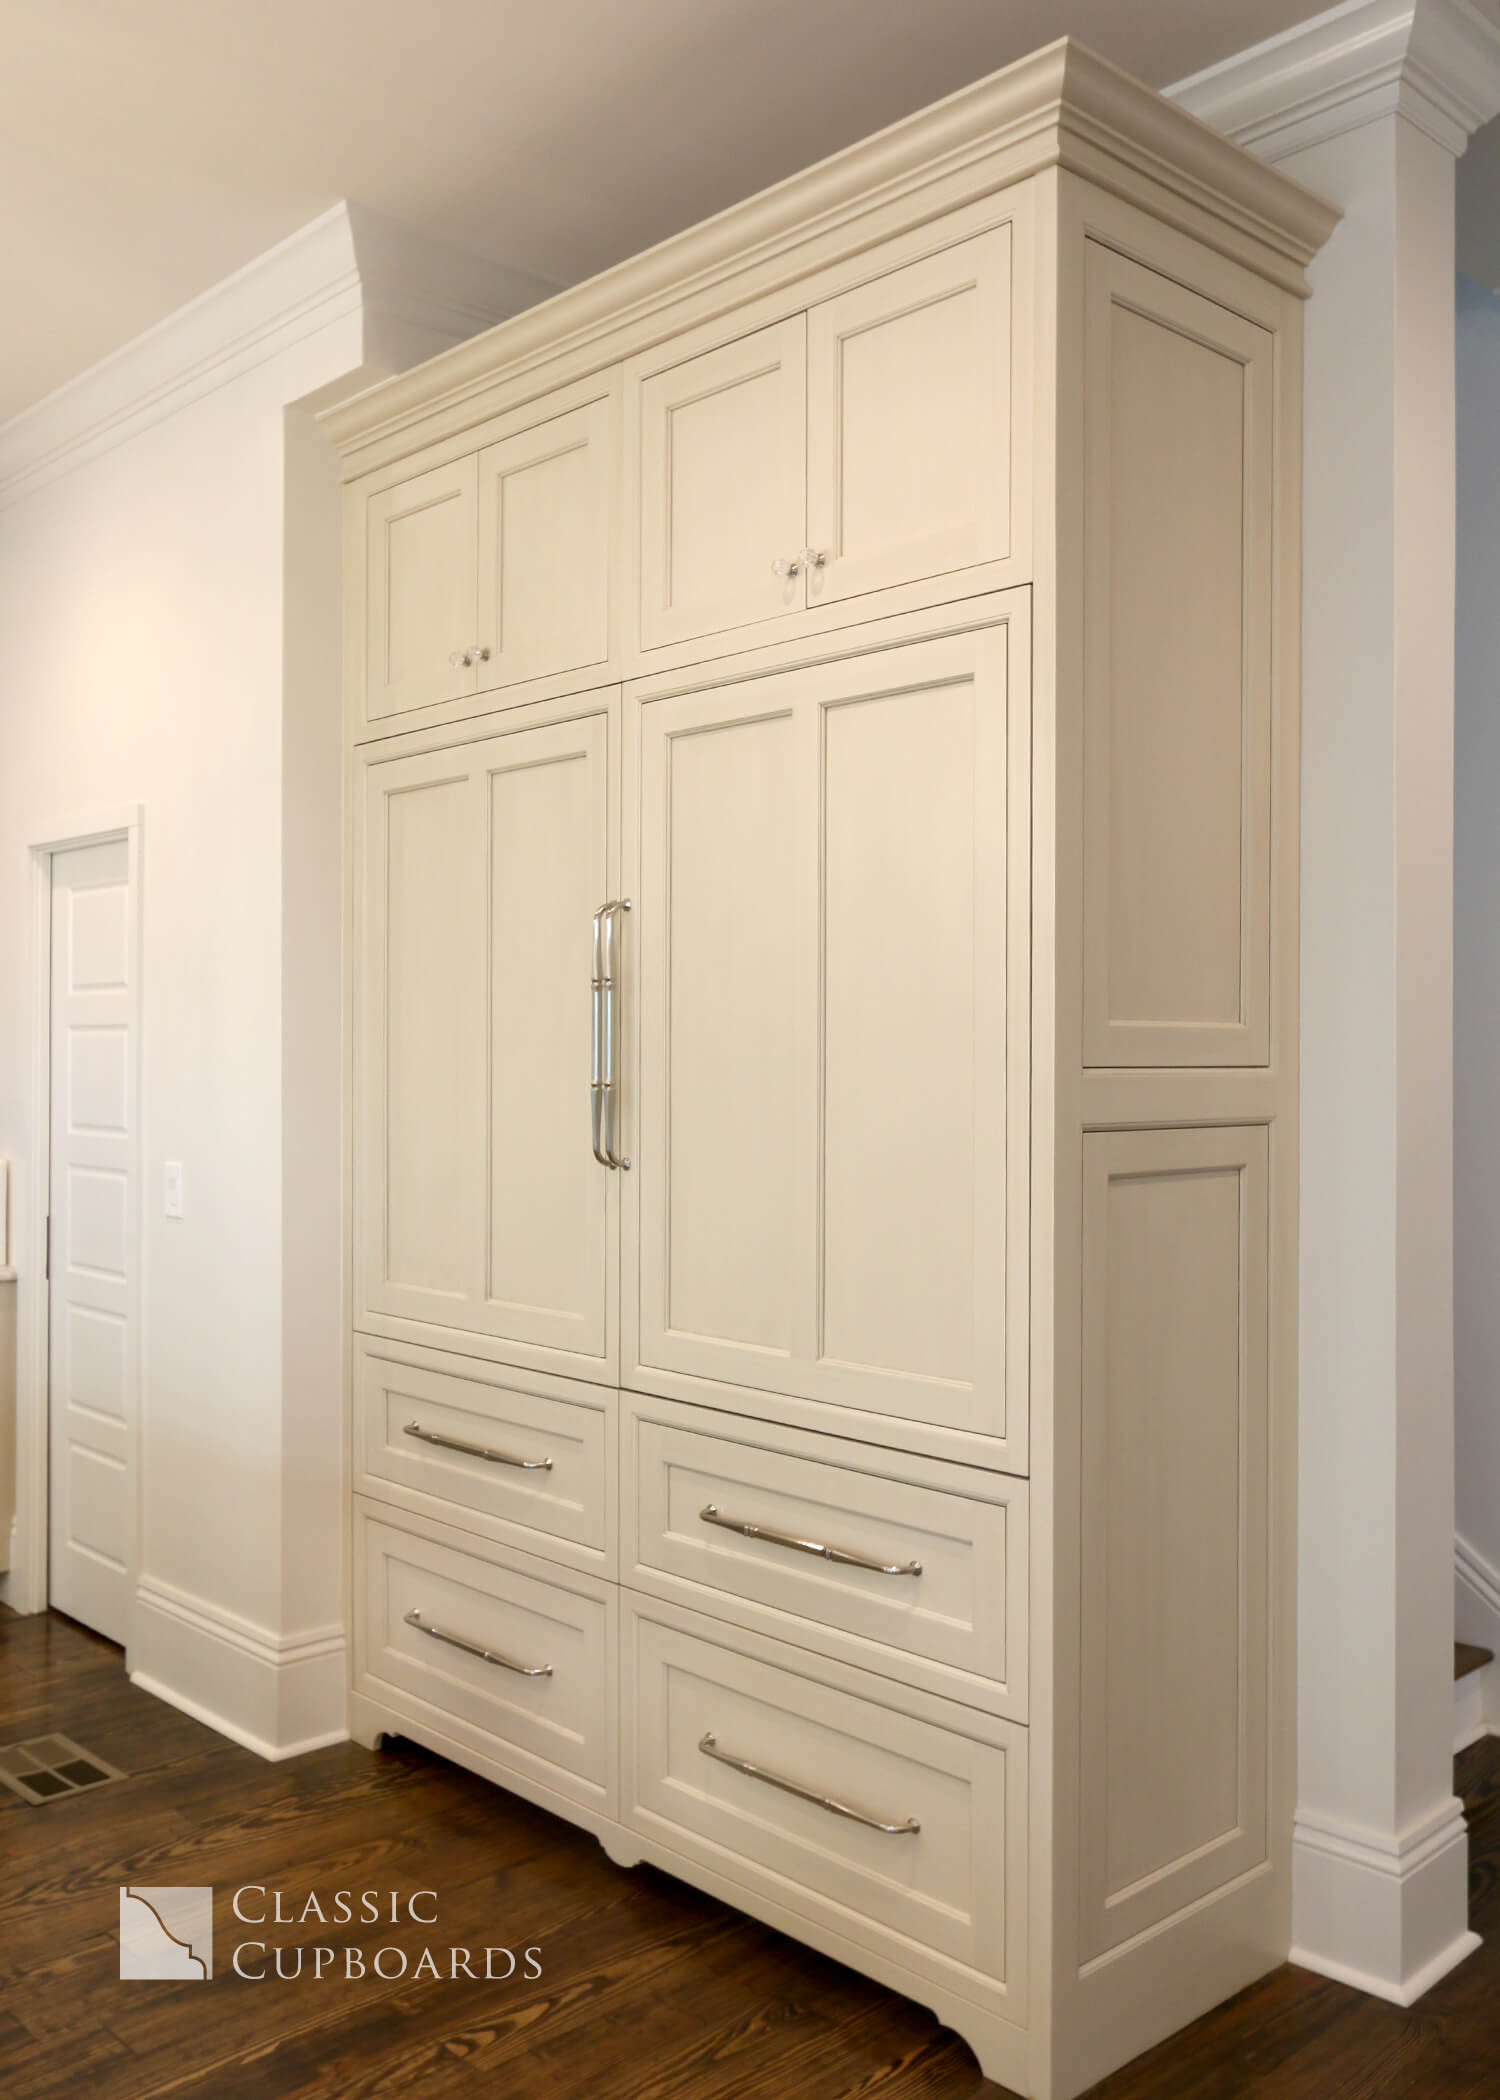 Concealed fridge with traditional cabinetry